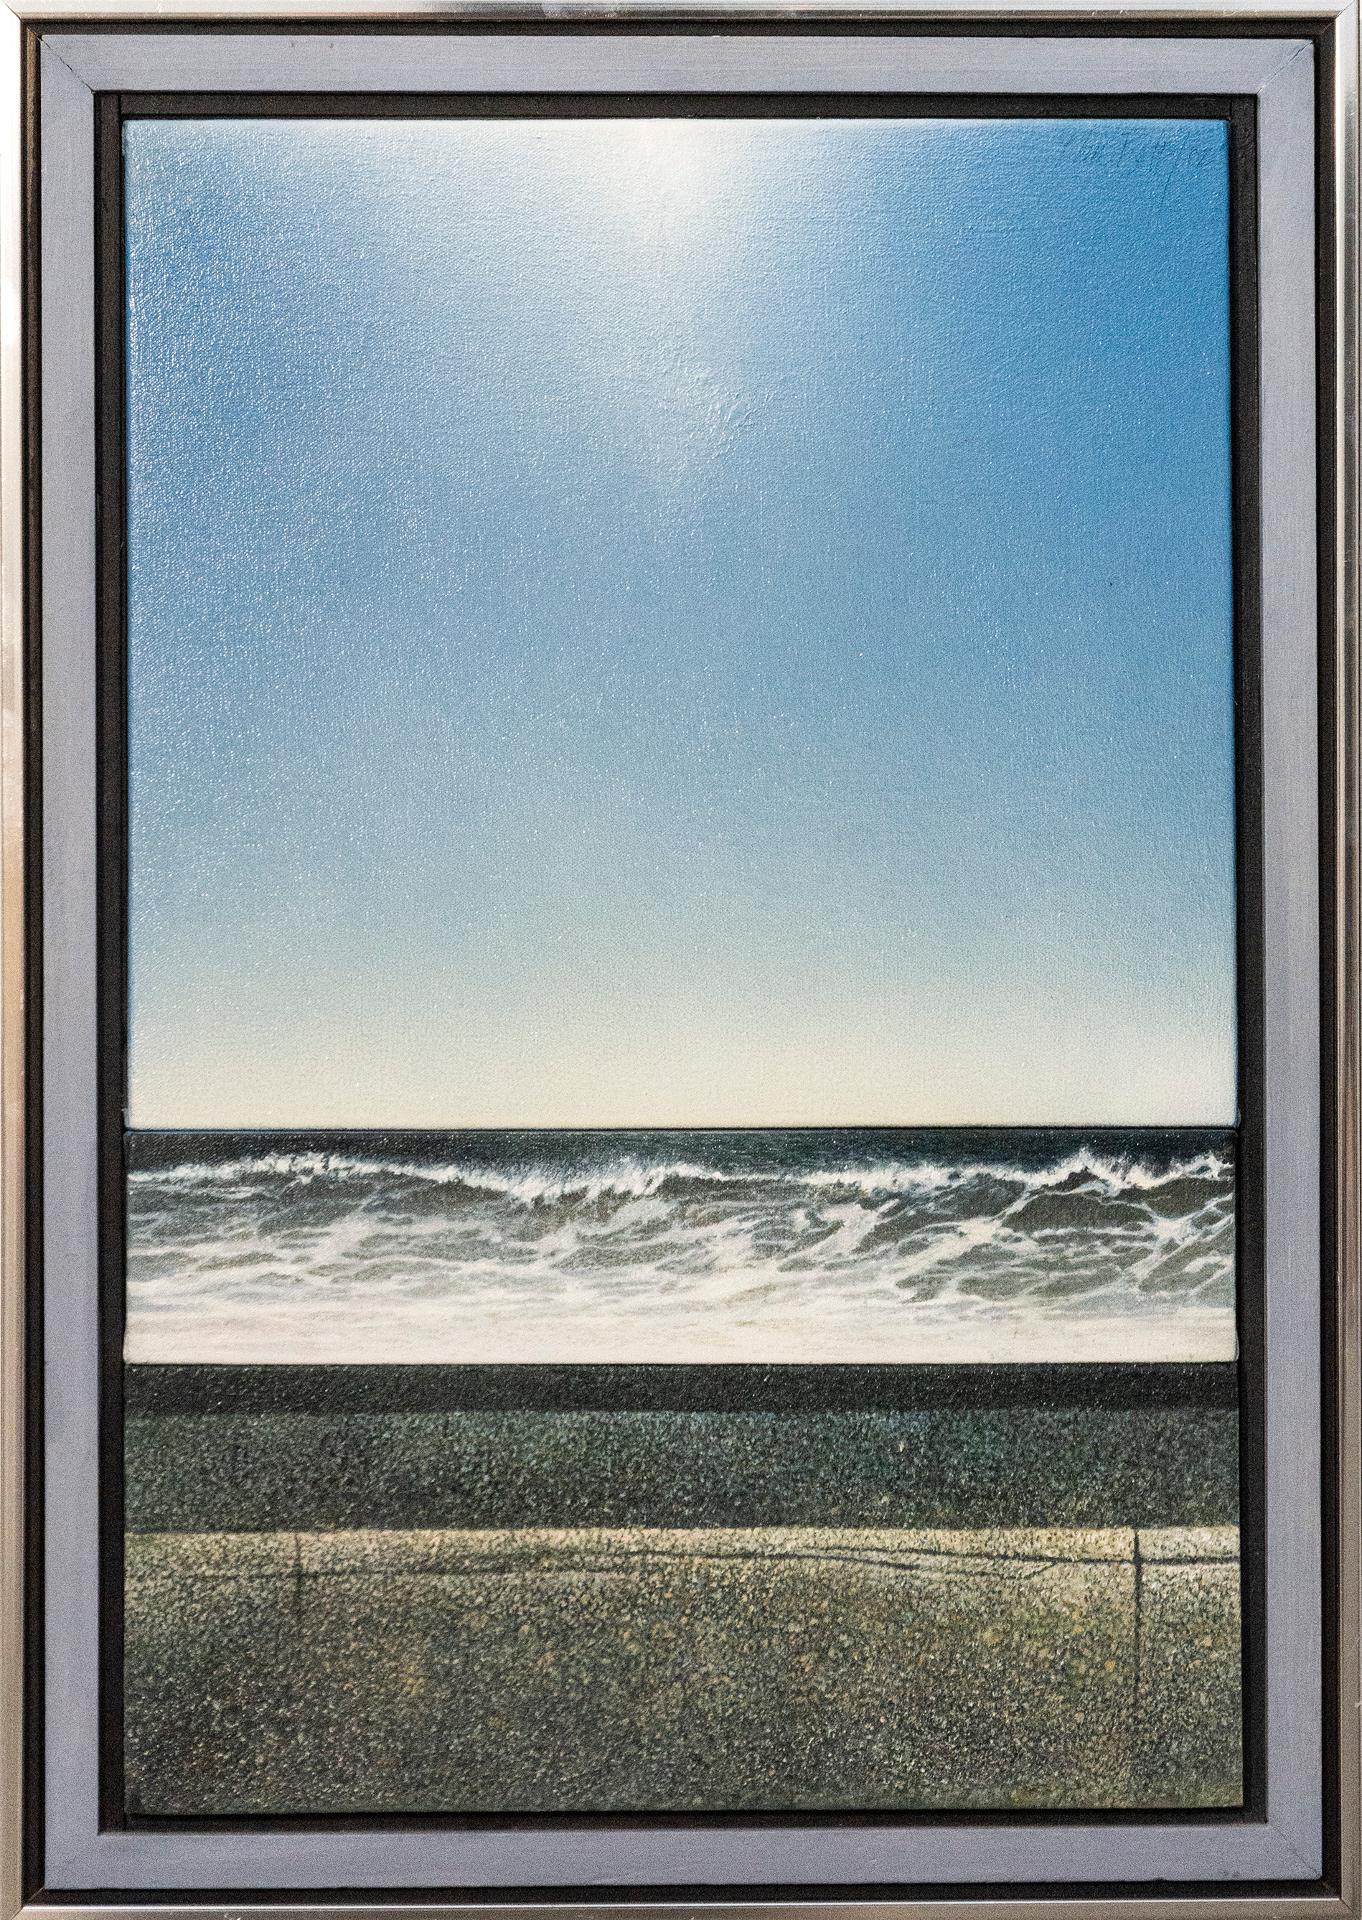 Ron Bolt (1938) - Wave is Waiting, 2002